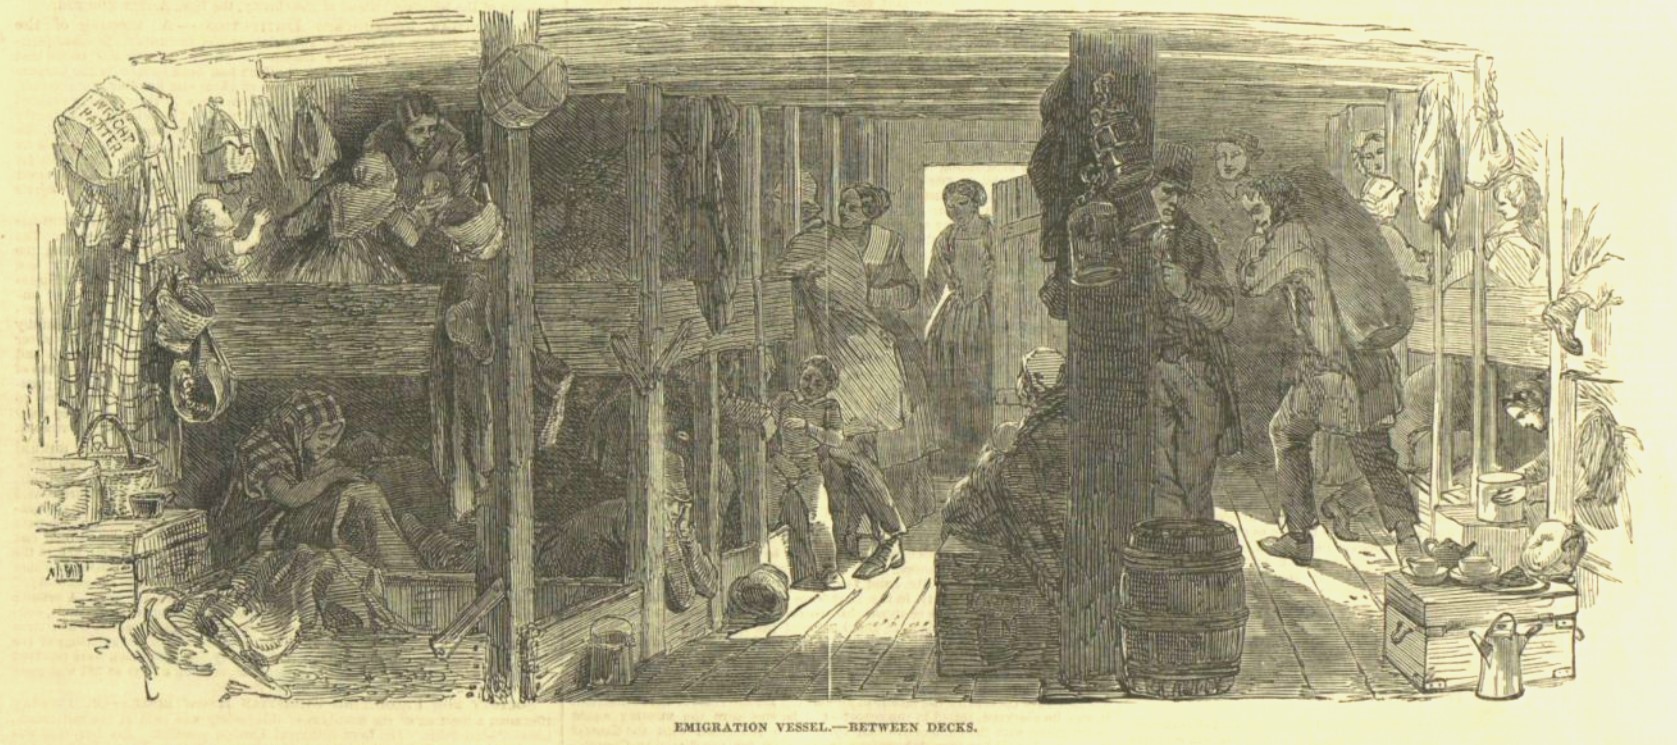 Sketch of between the decks of an emigrant vessel, taken from "Illustrated London News" 10 May 1851, p.387